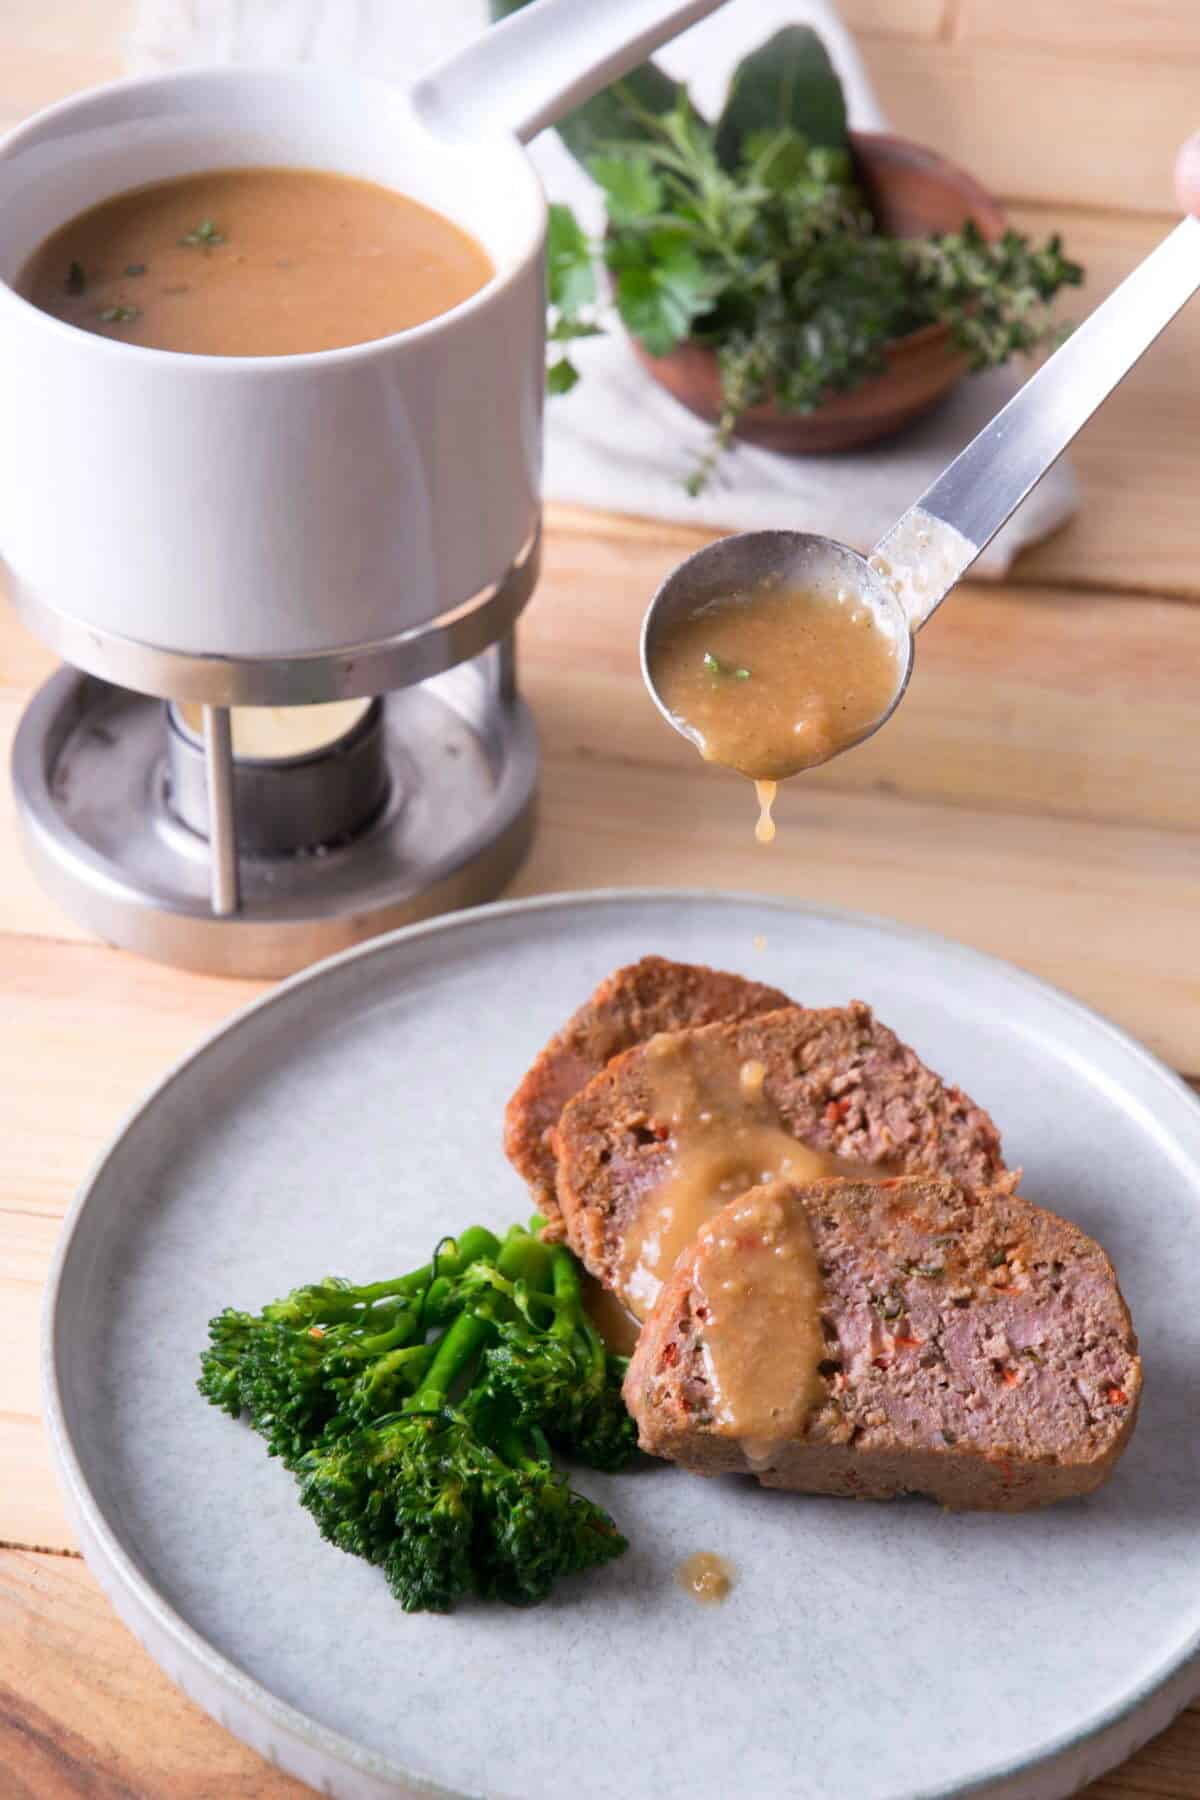 Gravy dripping over plate of meatloaf and broccoli, gravy warmer in the background.